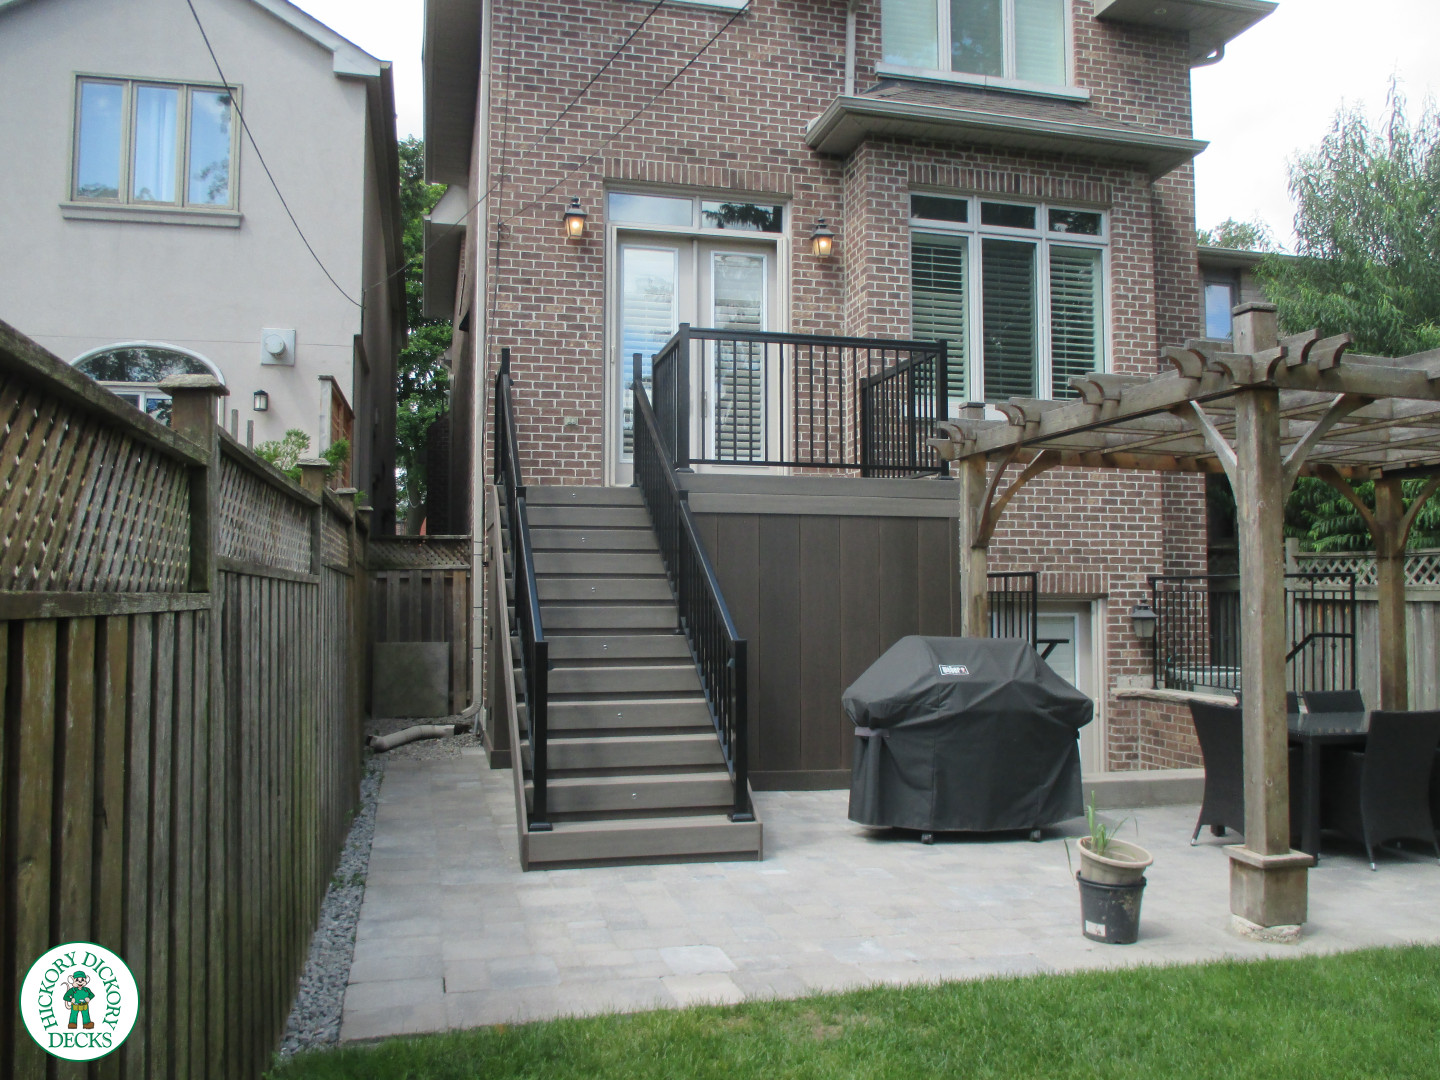 Elevated grey clubhouse deck with black aluminum railing and lights in steps.